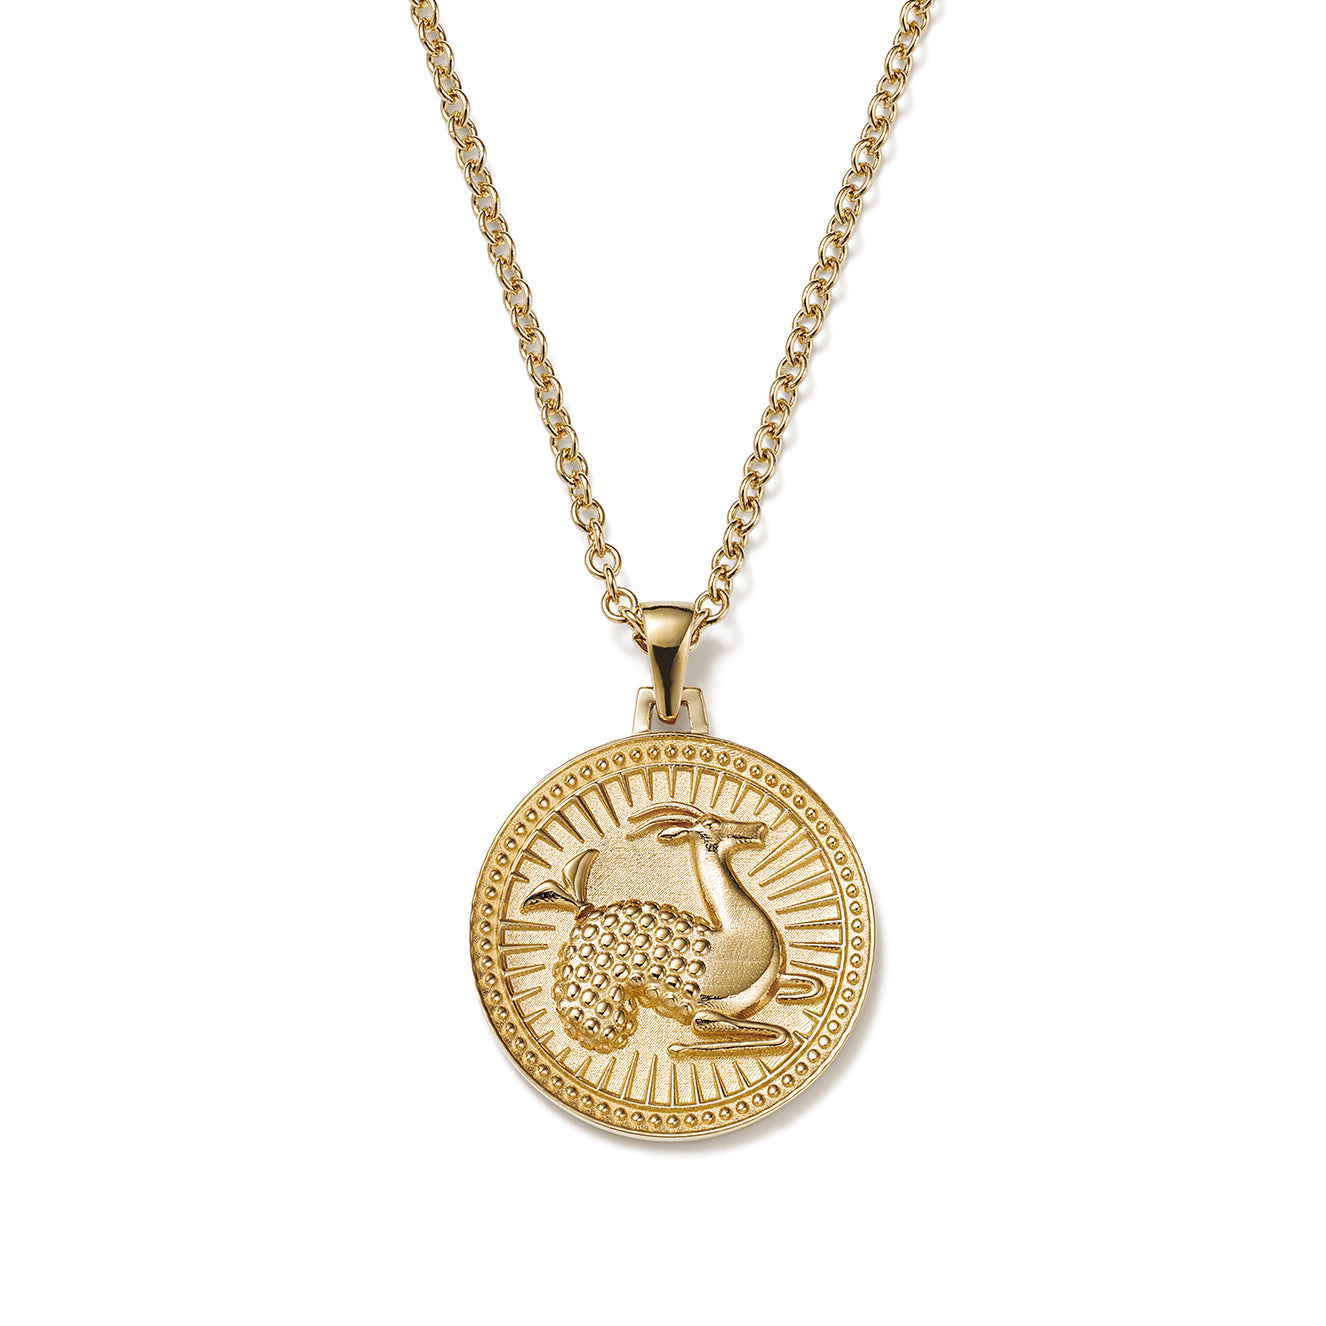 Twojeys Capricorn Necklace Yellow HOR022| Buy Online at FOOTDISTRICT